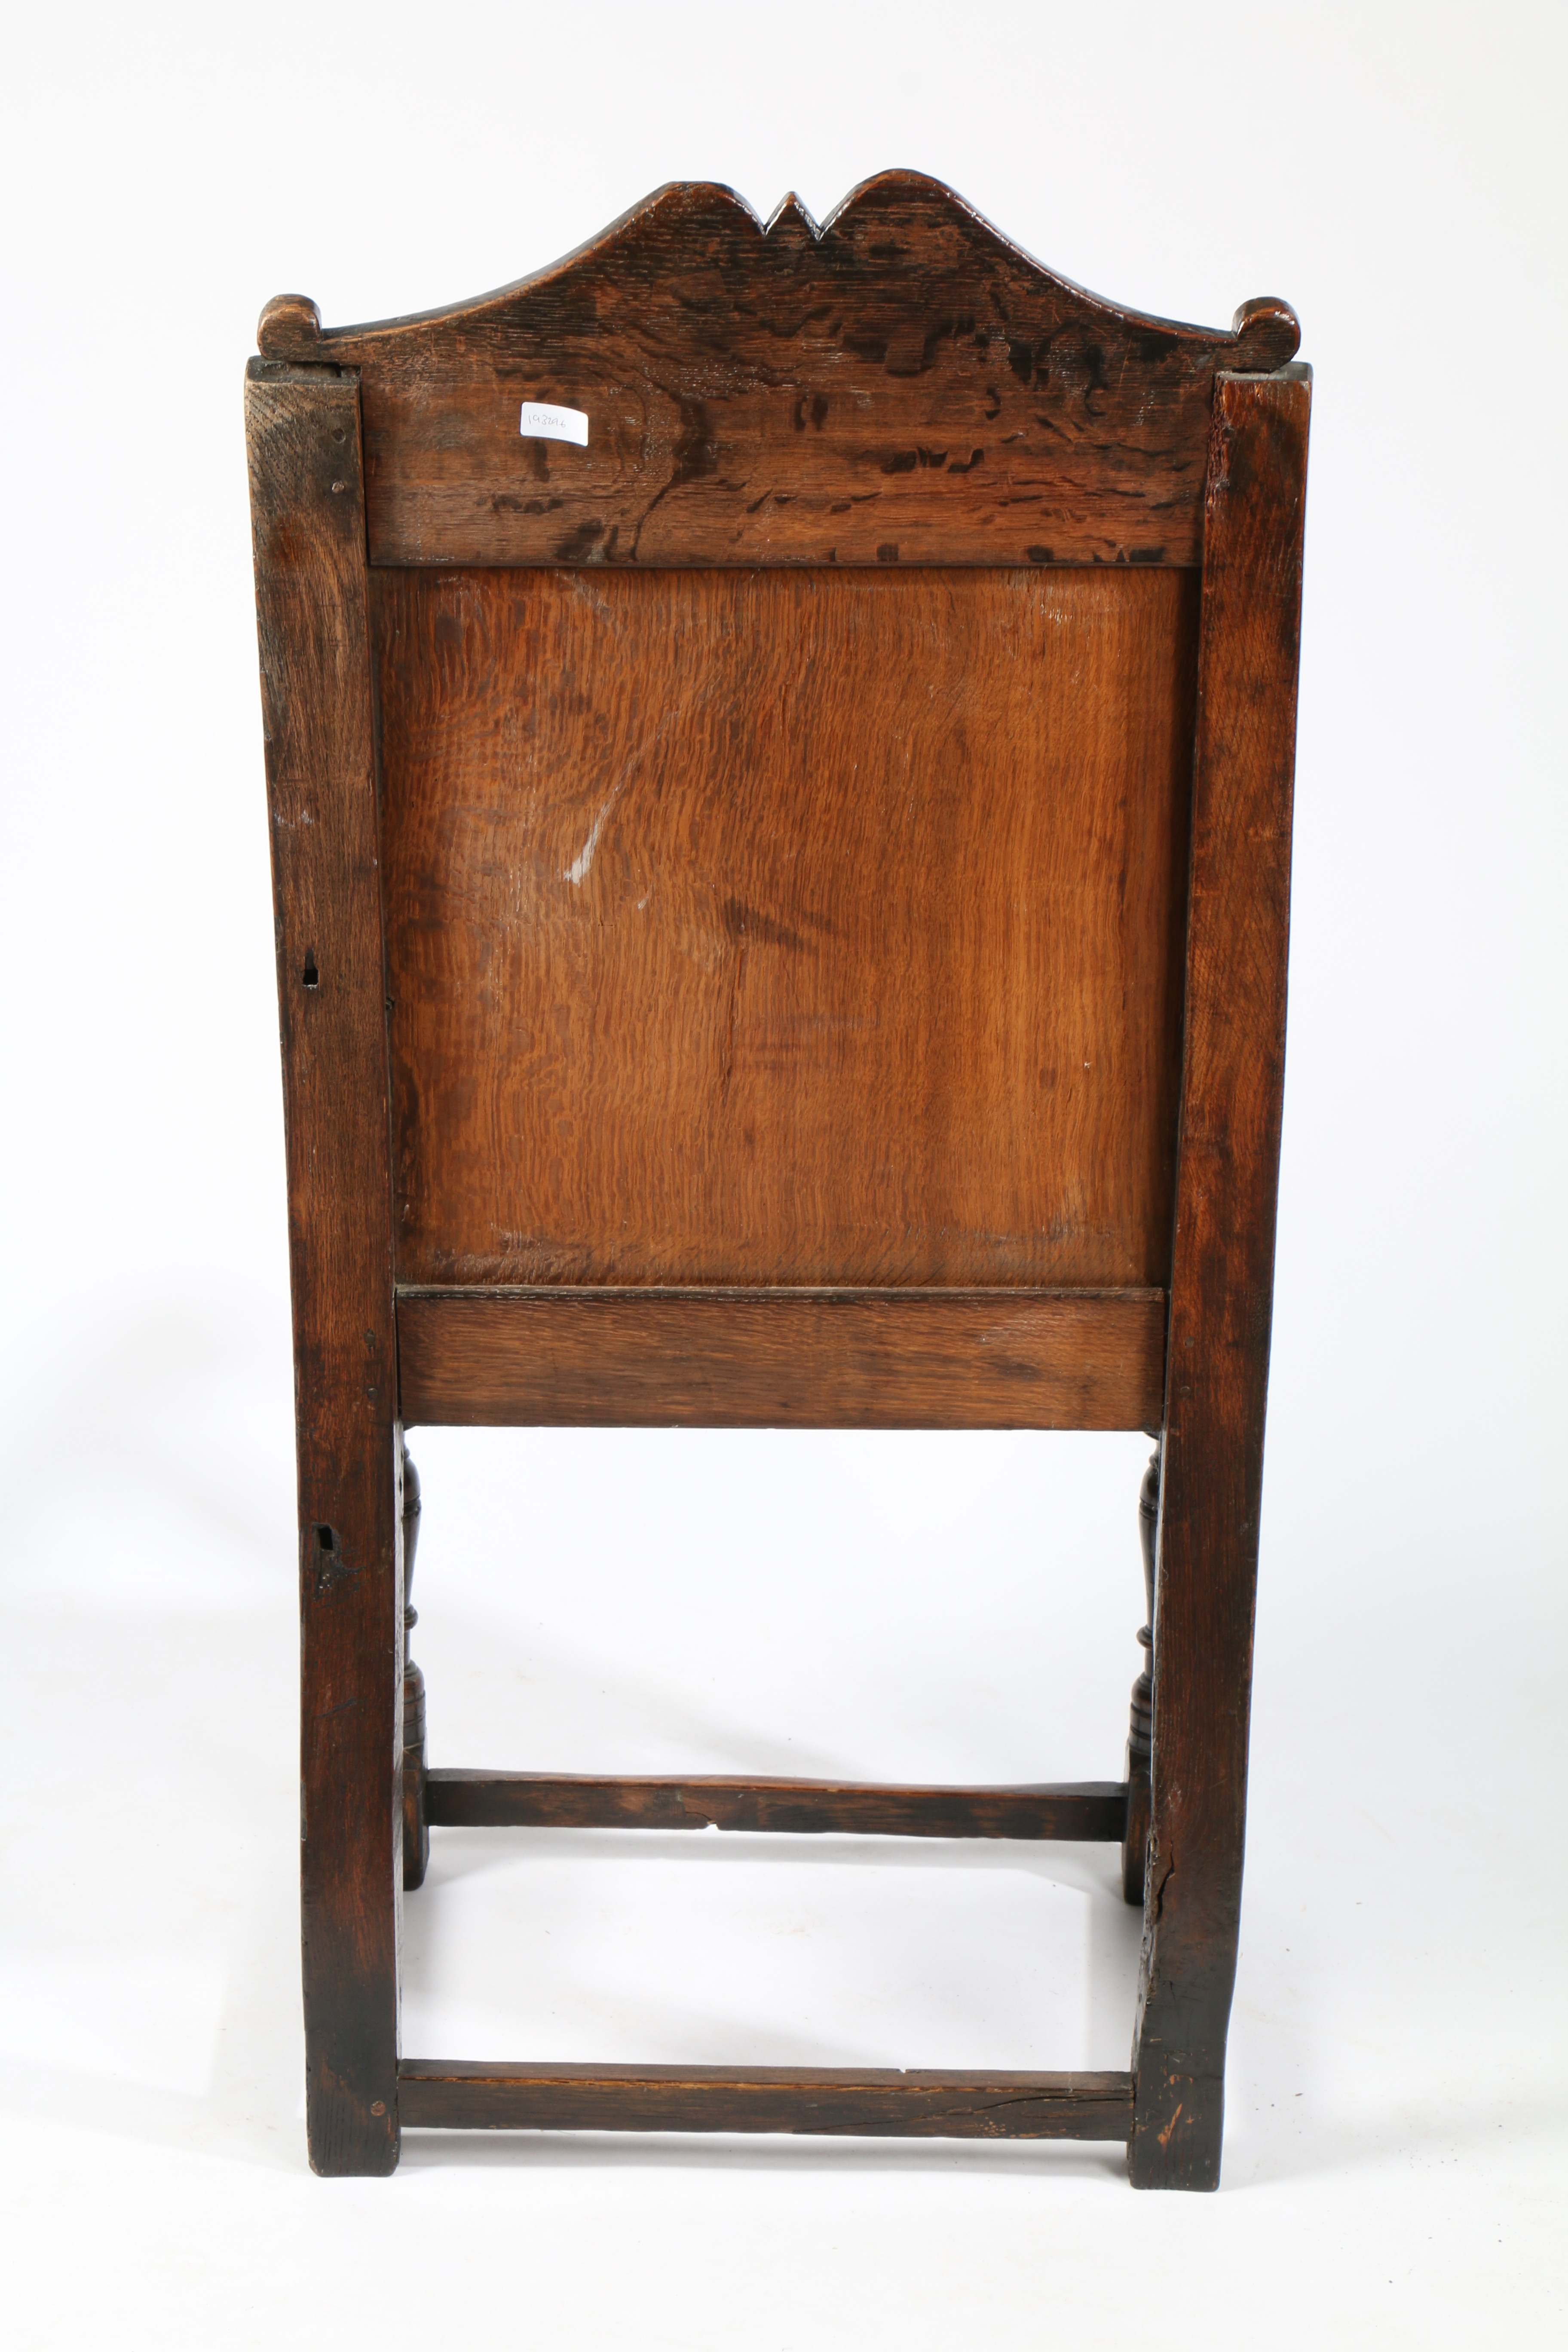 A CHARLES I OAK PANEL-BACK OPEN ARMCHAIR, CIRCA 1640. - Image 5 of 6